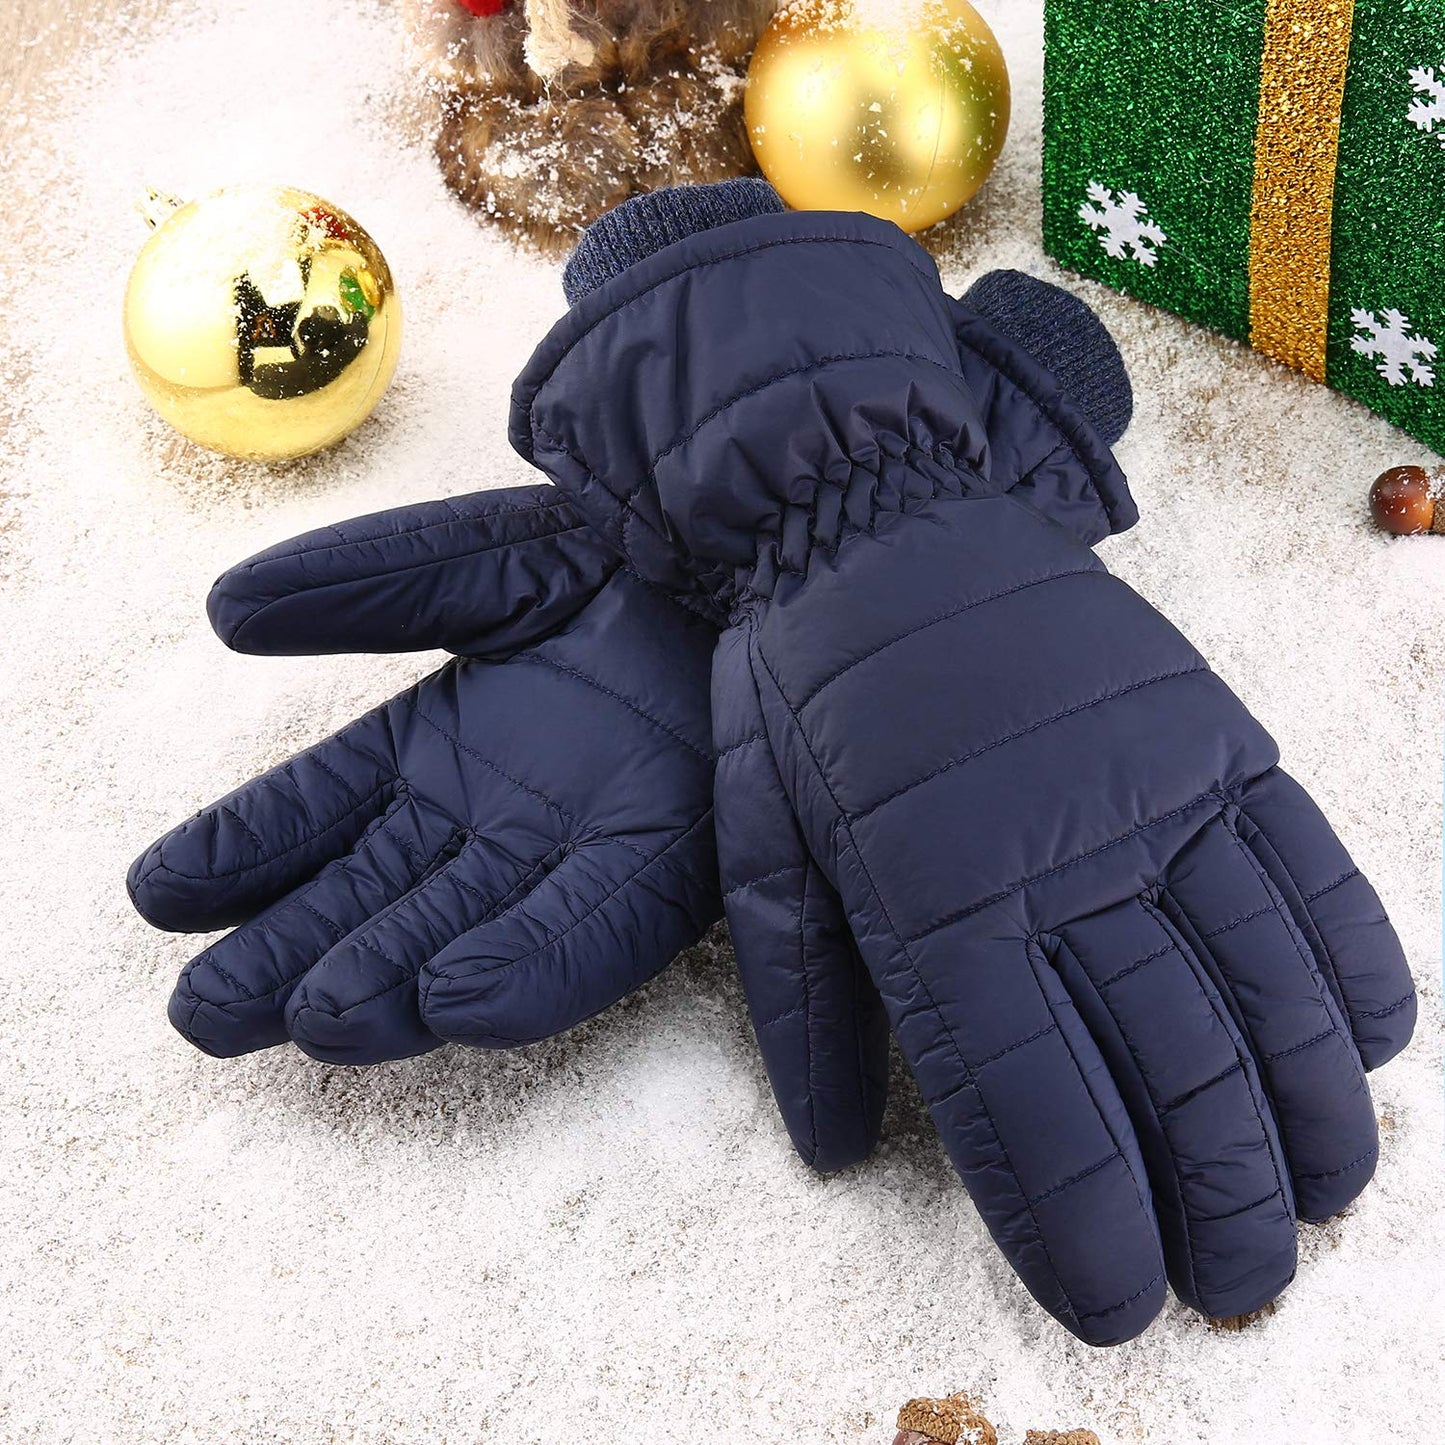 Andake 90% Duck Down Mittens Gloves For Men -20℉ Cold Weather Warm Winter Snow Gloves For Walking Jogging Work Outdoor (Small/Medium, BLUE-1) - Opticdeals